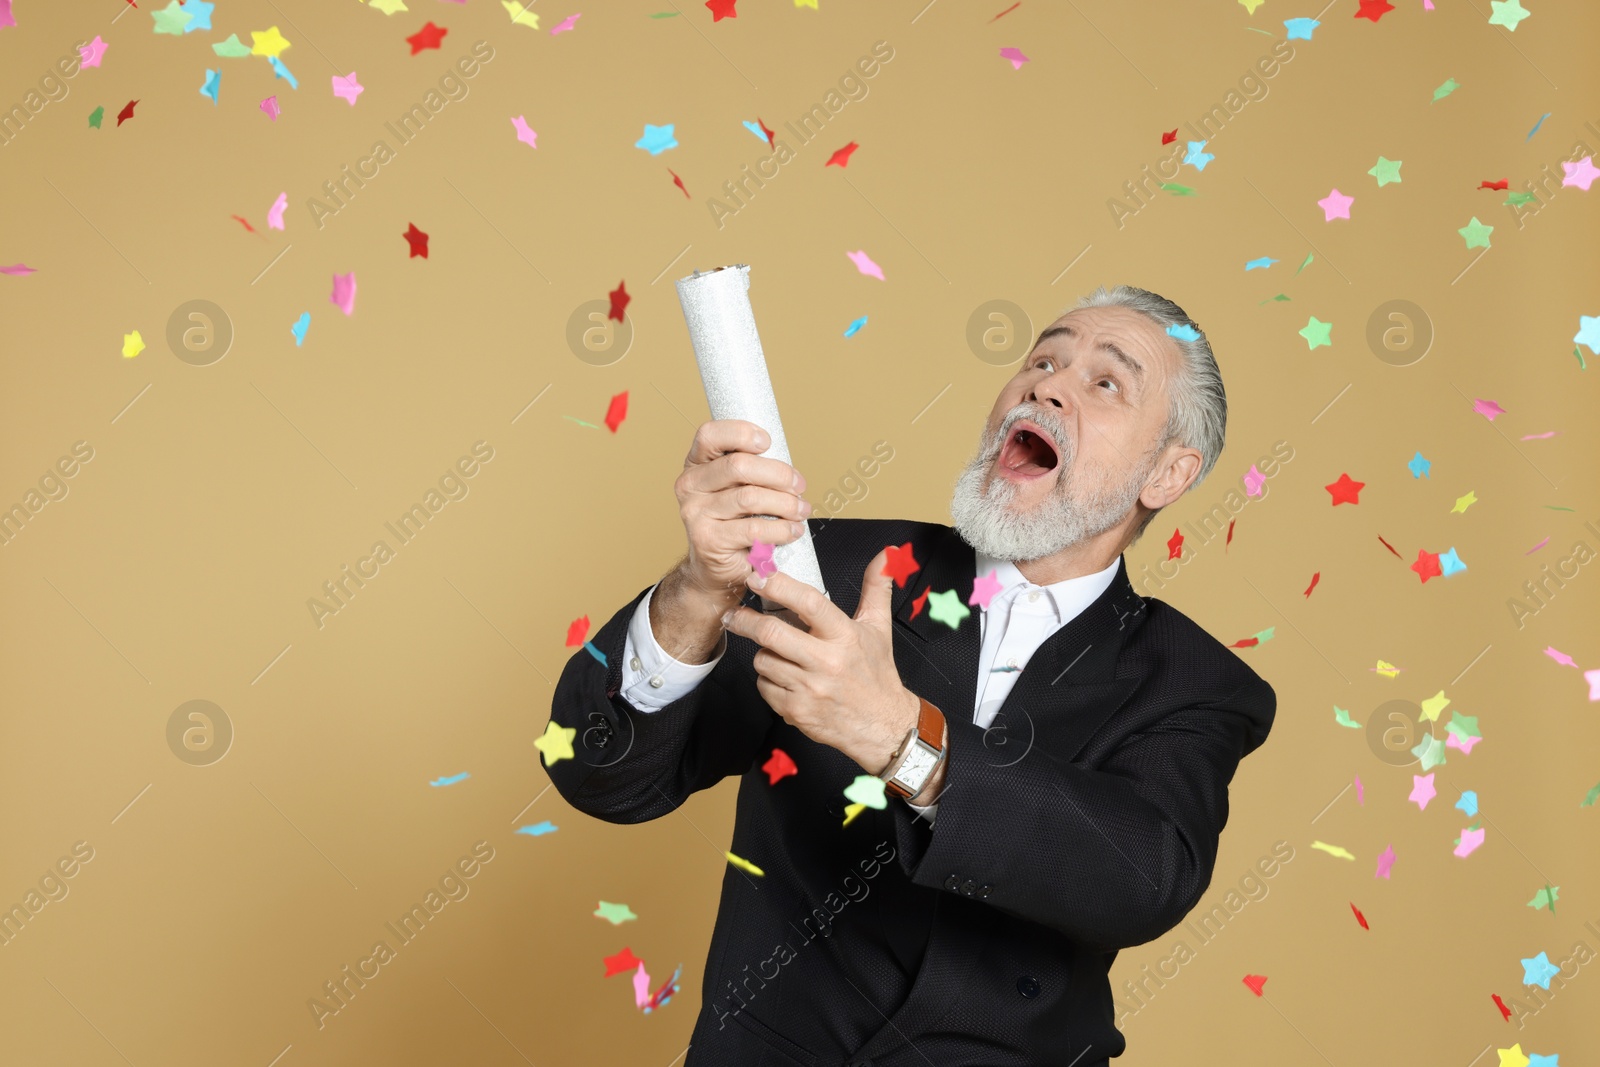 Photo of Emotional man blowing up party popper on beige background